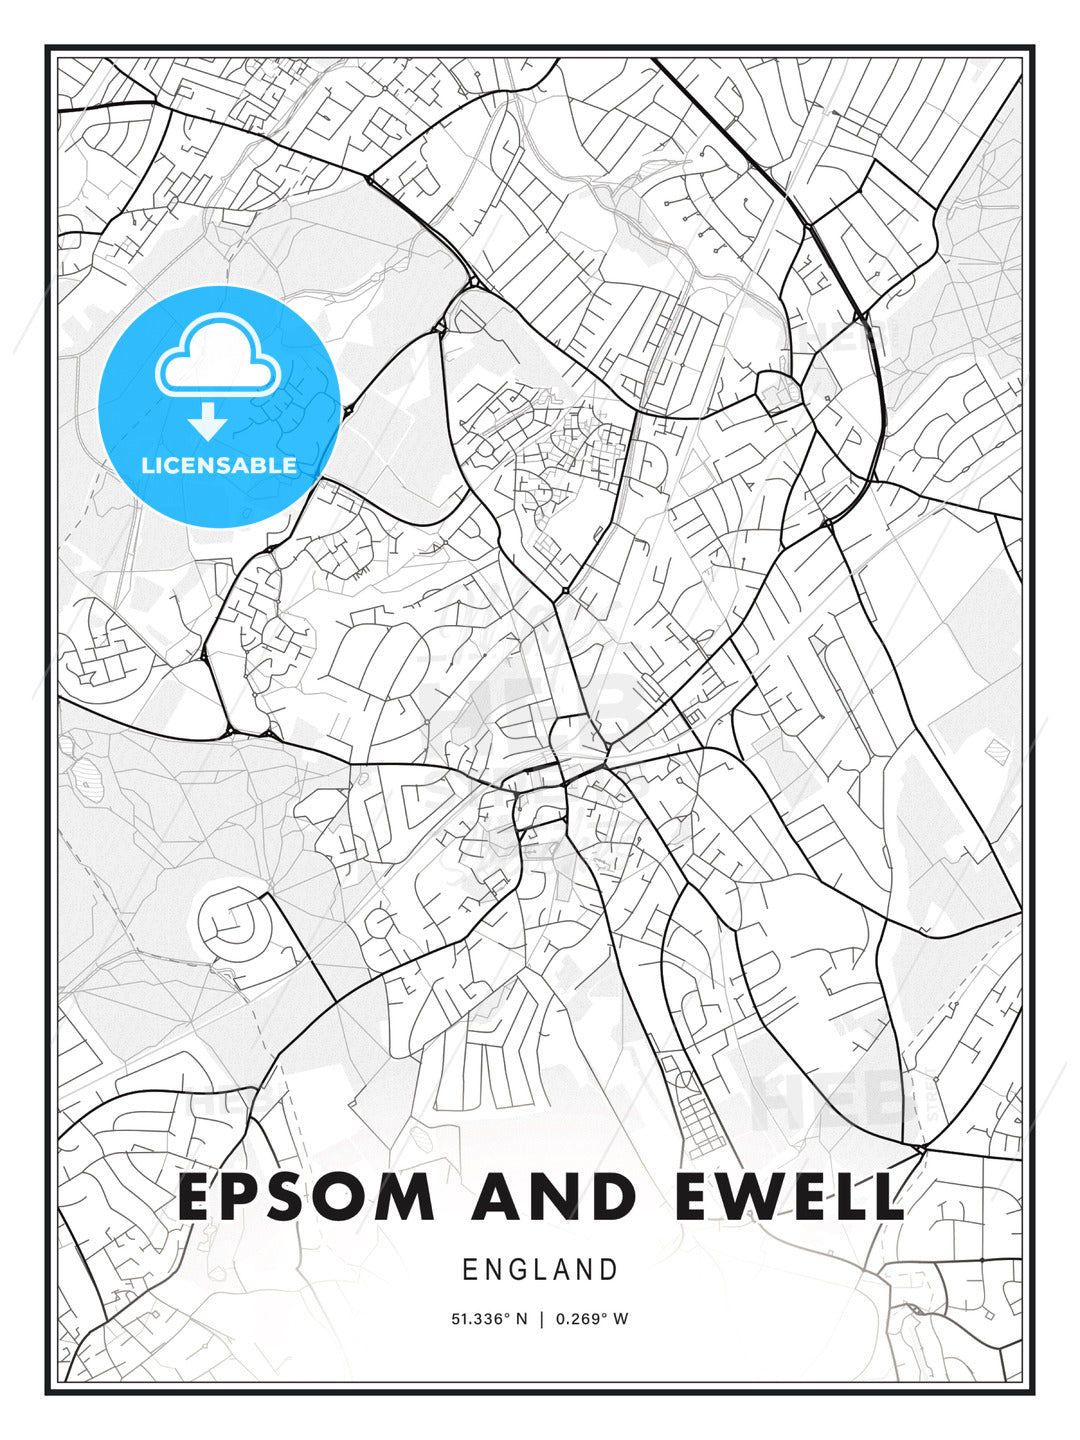 Epsom and Ewell, England, Modern Print Template in Various Formats - HEBSTREITS Sketches